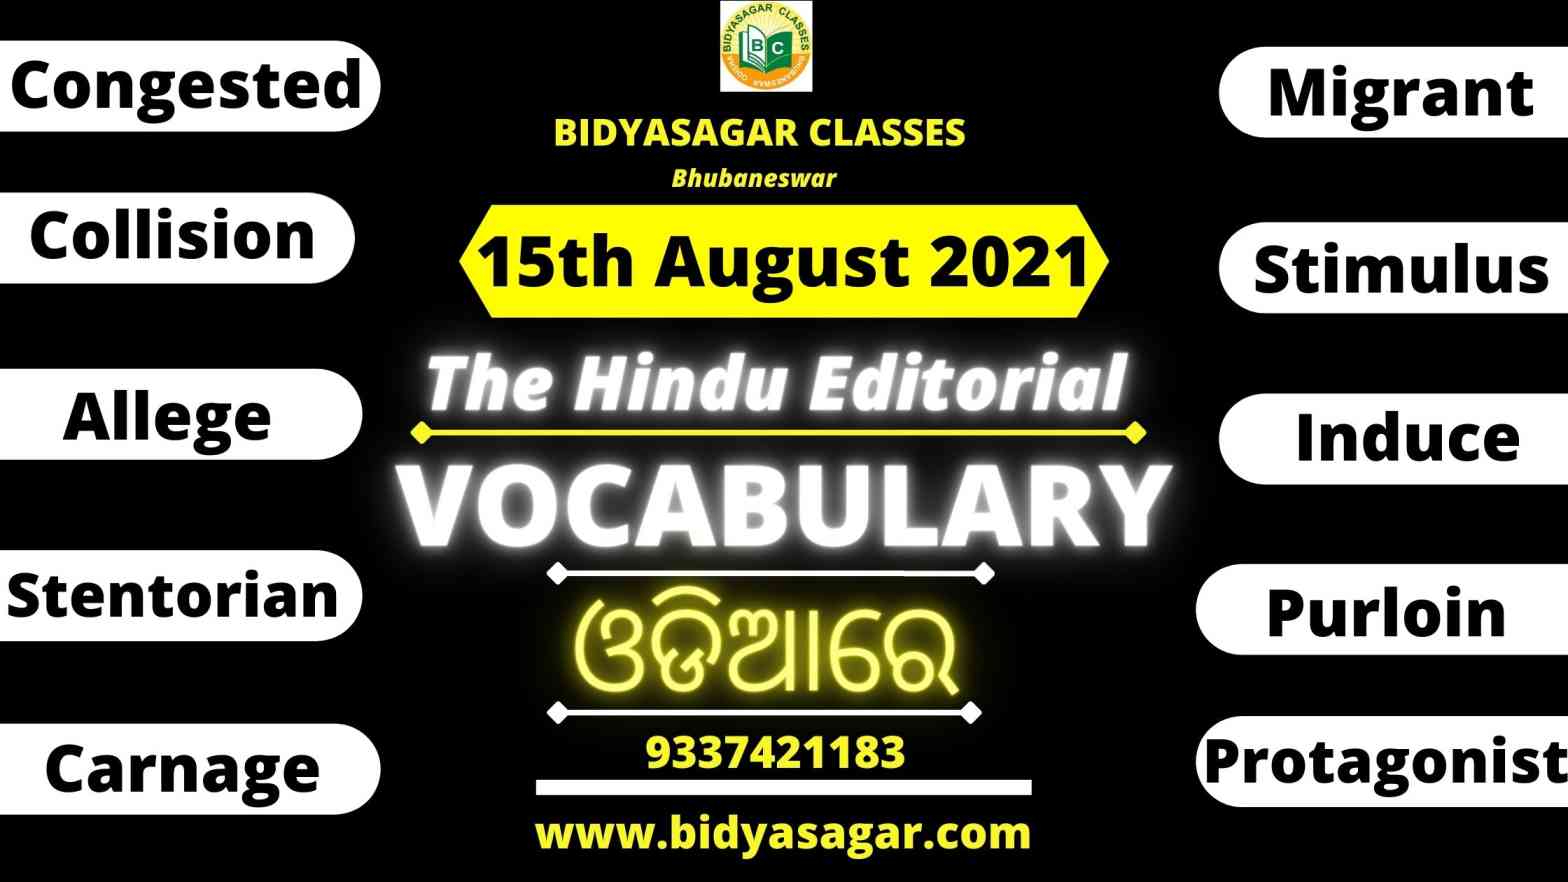 The Hindu Editorial Vocabulary of 15th August 2021